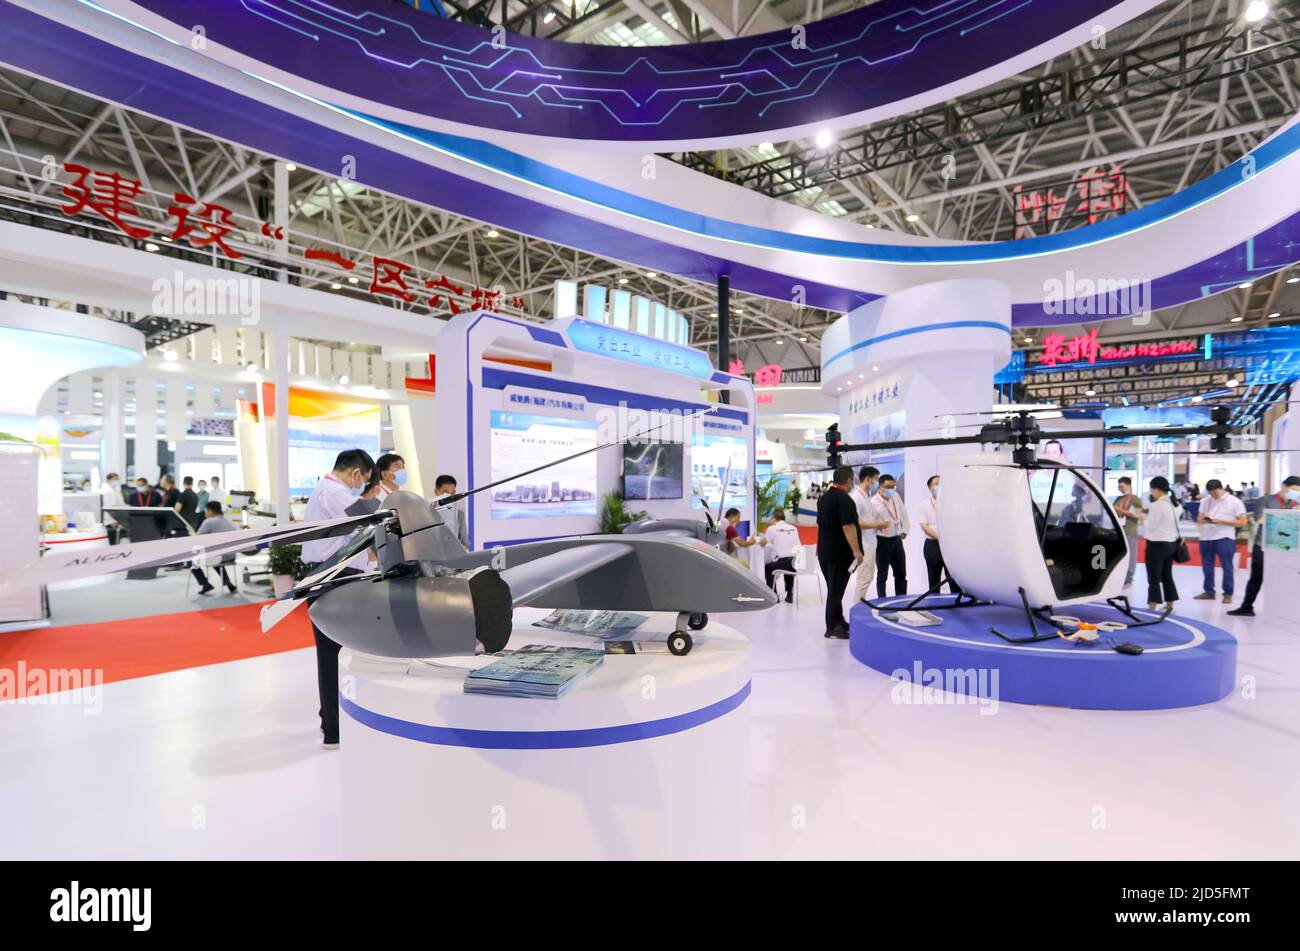 FUZHOU, CHINA - JUNE 18, 2022 - New manned aircraft and unmanned aerial vehicles (UAVs) are seen at the Exhibition area at The Straits Convention and Stock Photo